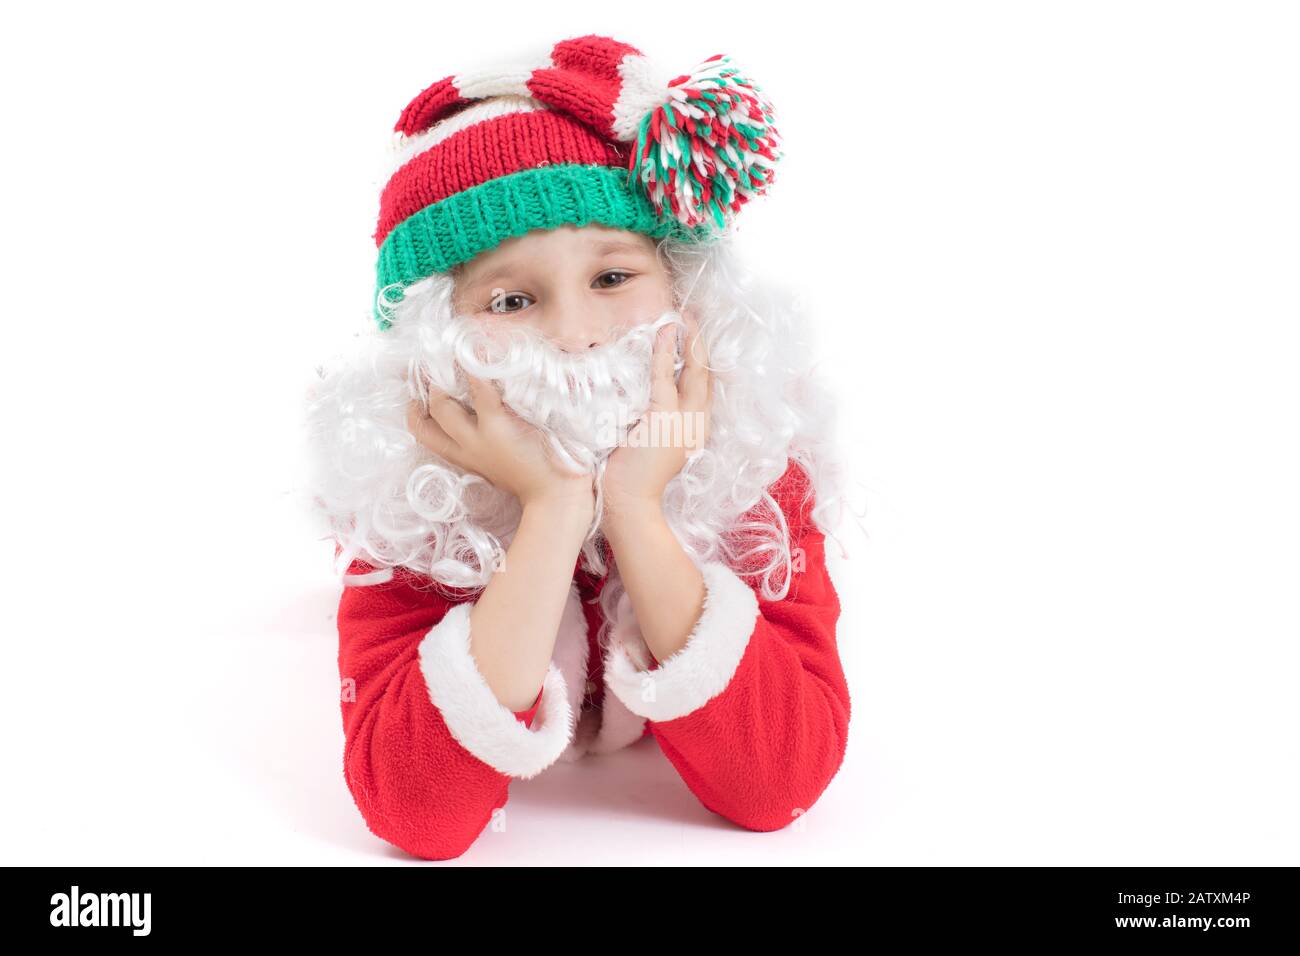 Child Santa Claus in a knitted hat. Christmas boy on a white background.Christmas holidays concept Stock Photo